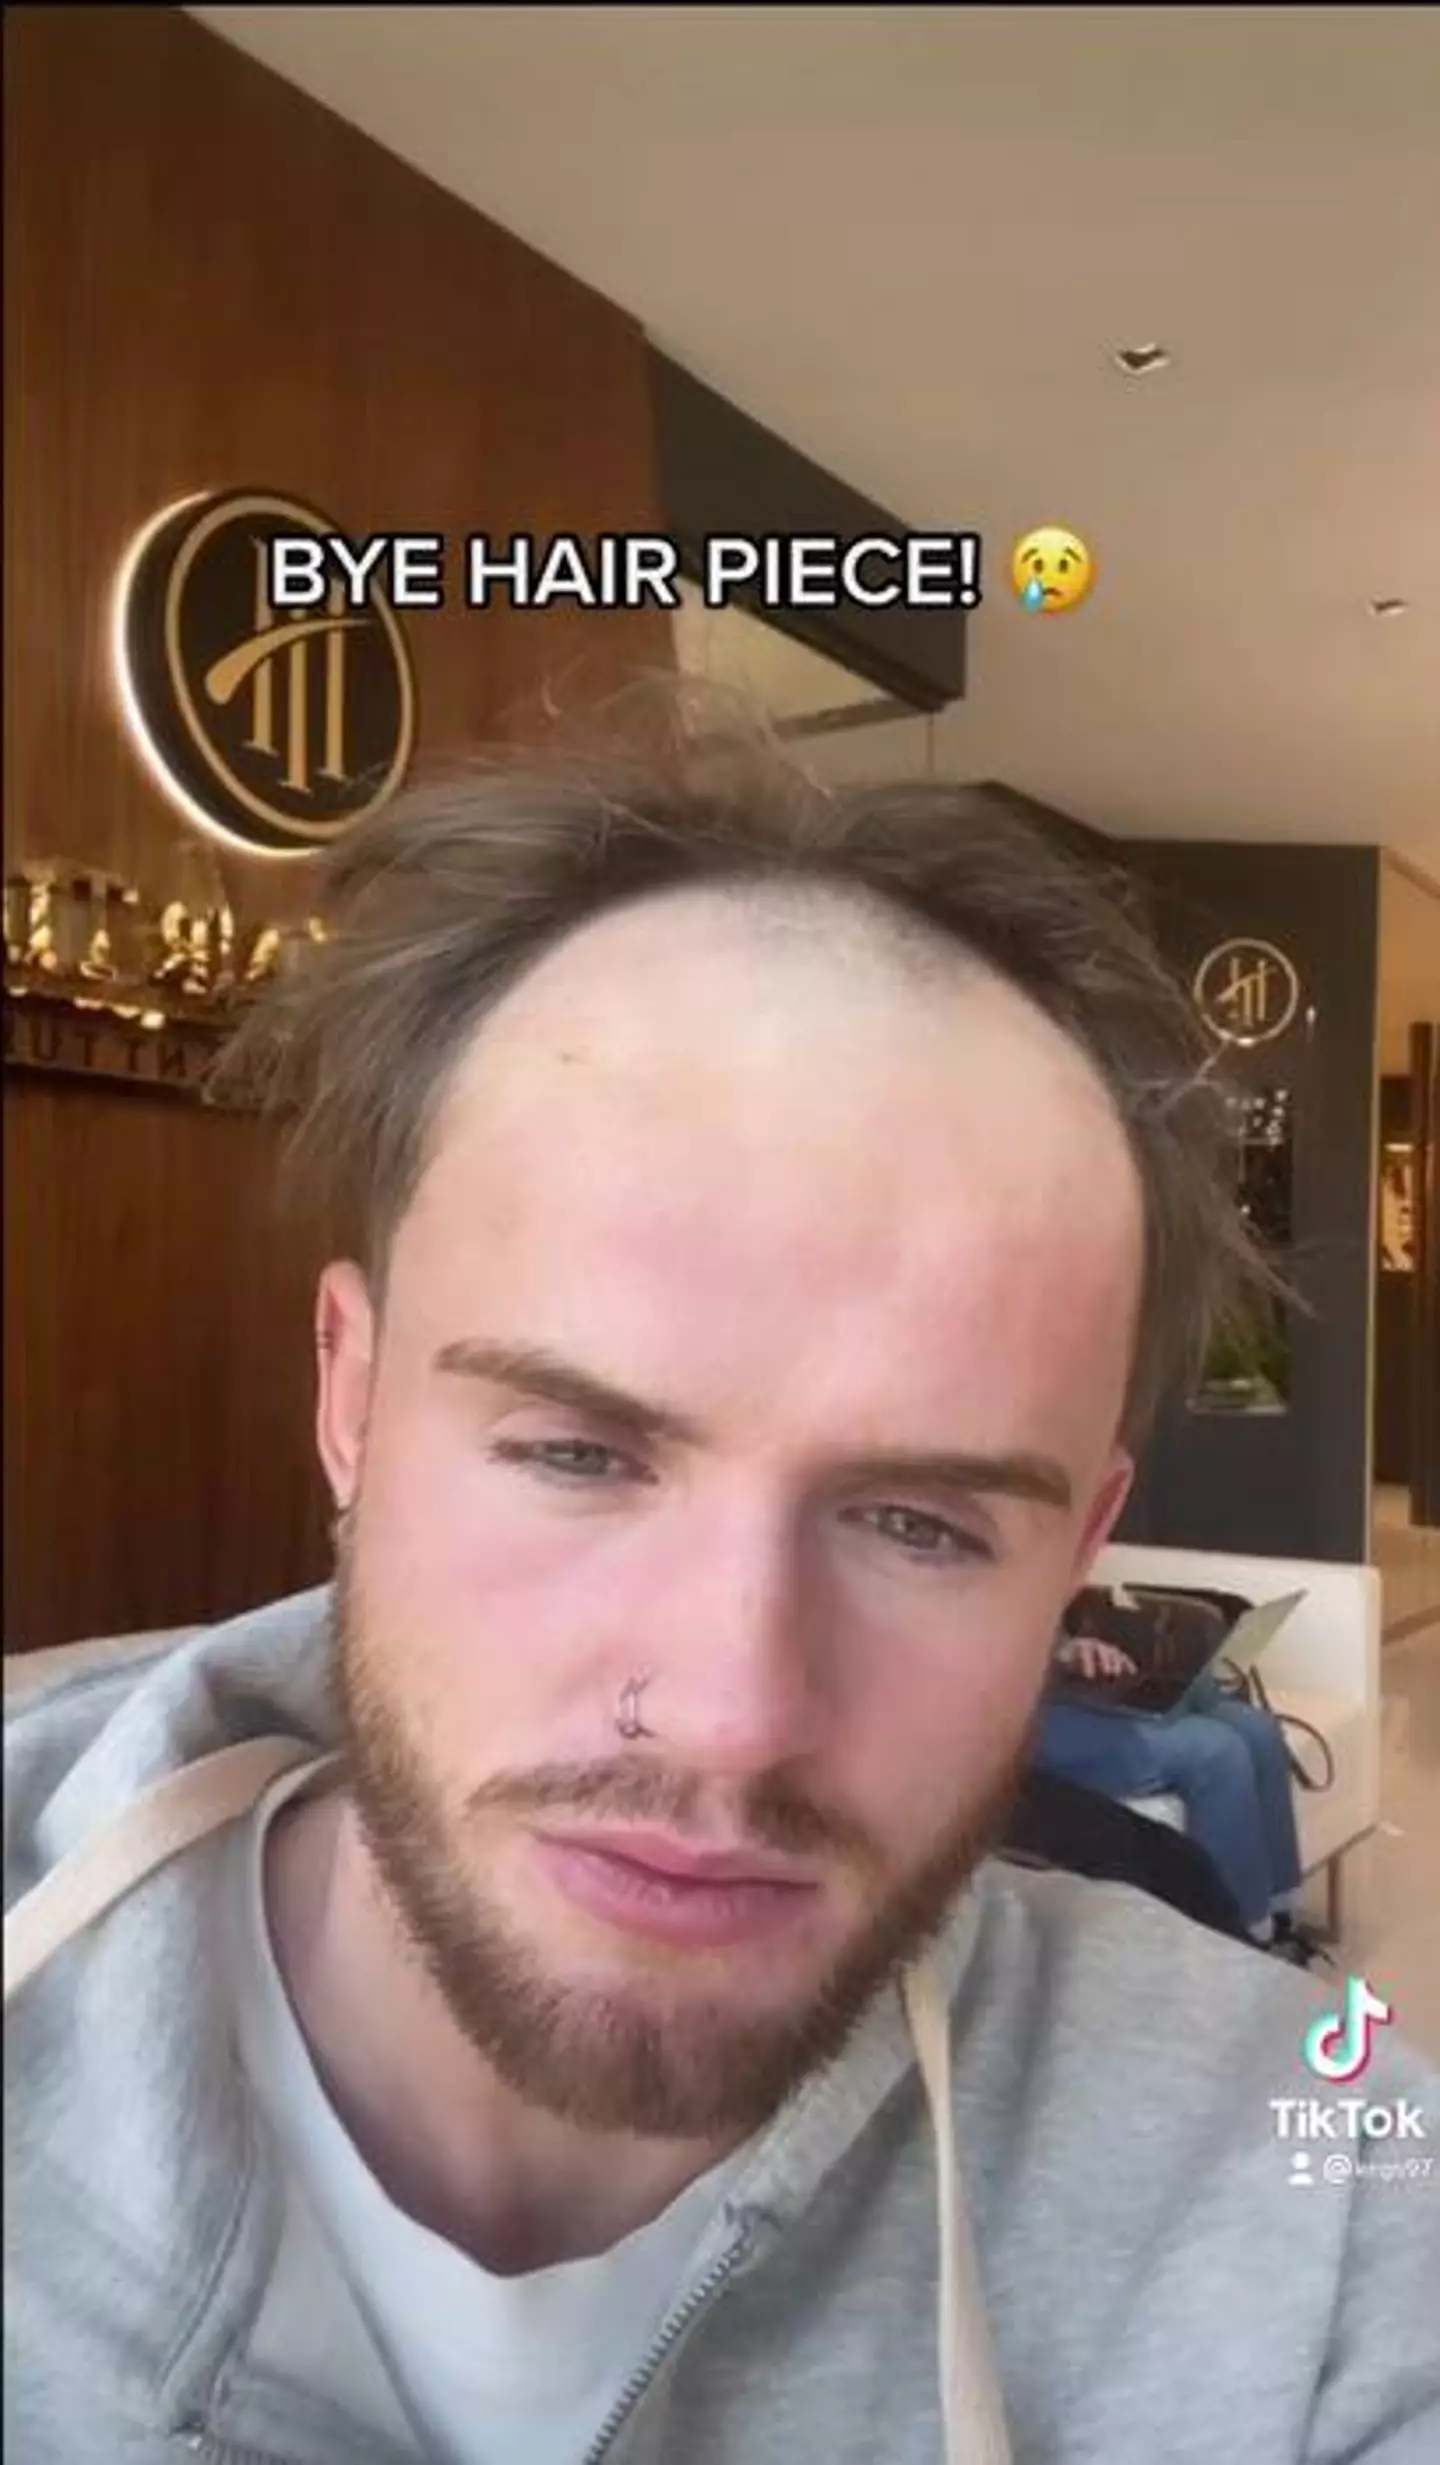 Kegs shed his hairpiece for a more permanent hair transplant.